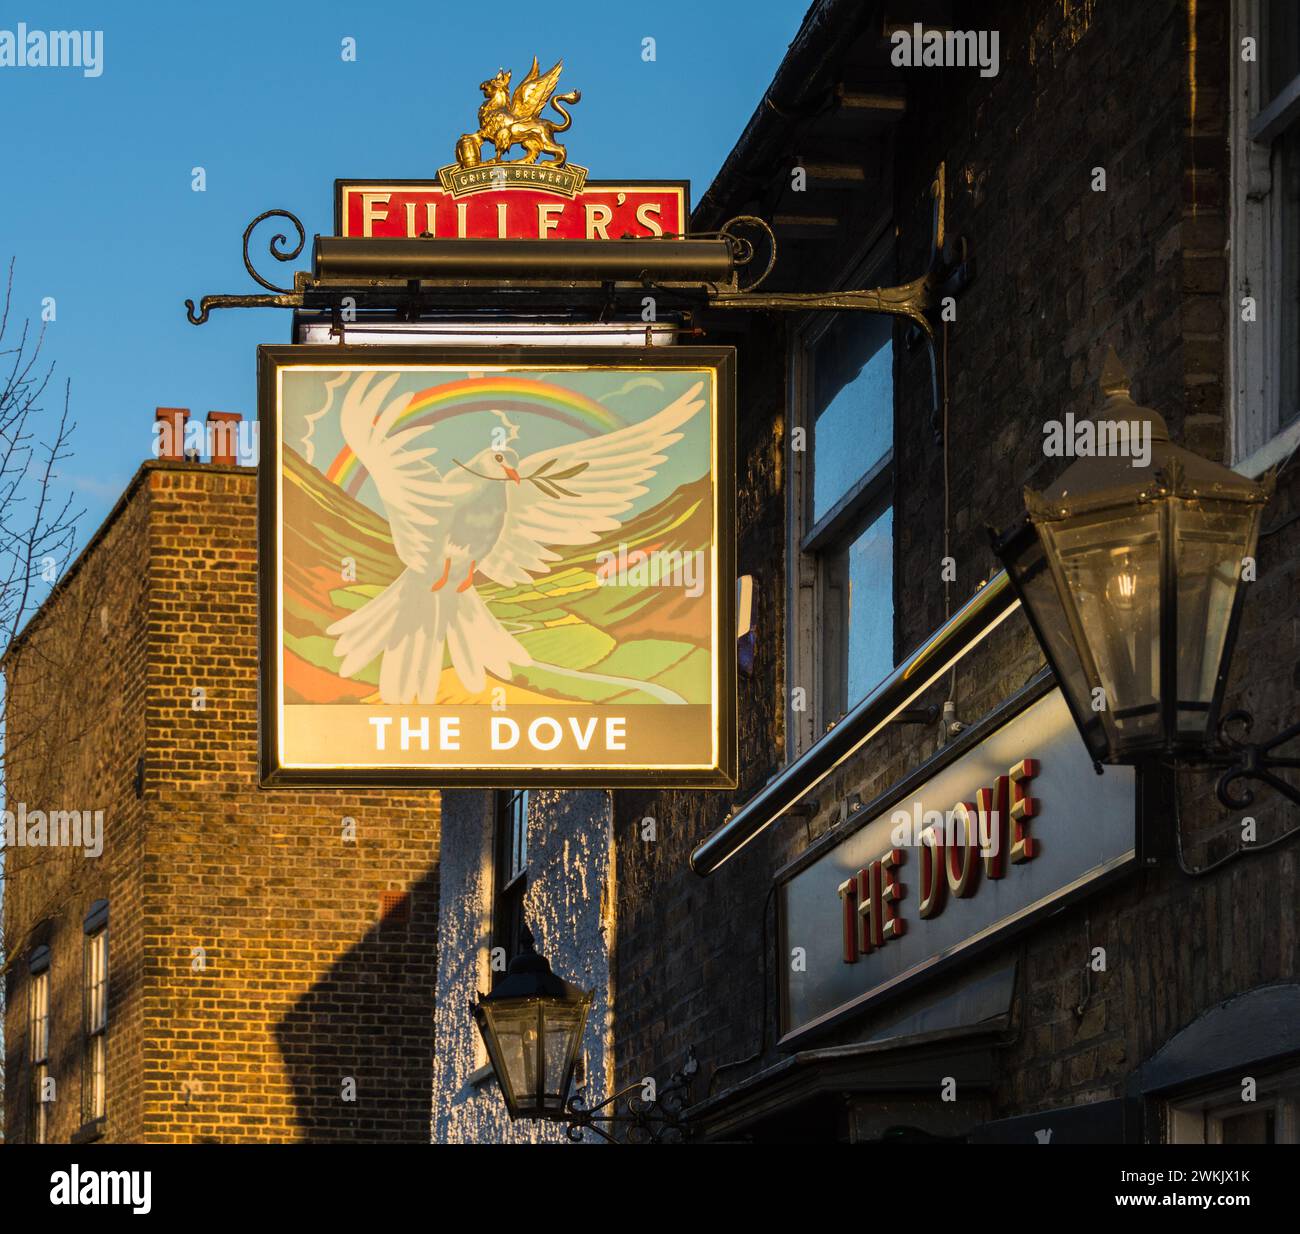 Closeup of The Dove Public House (Fullers) signage in Hammersmith, West ...